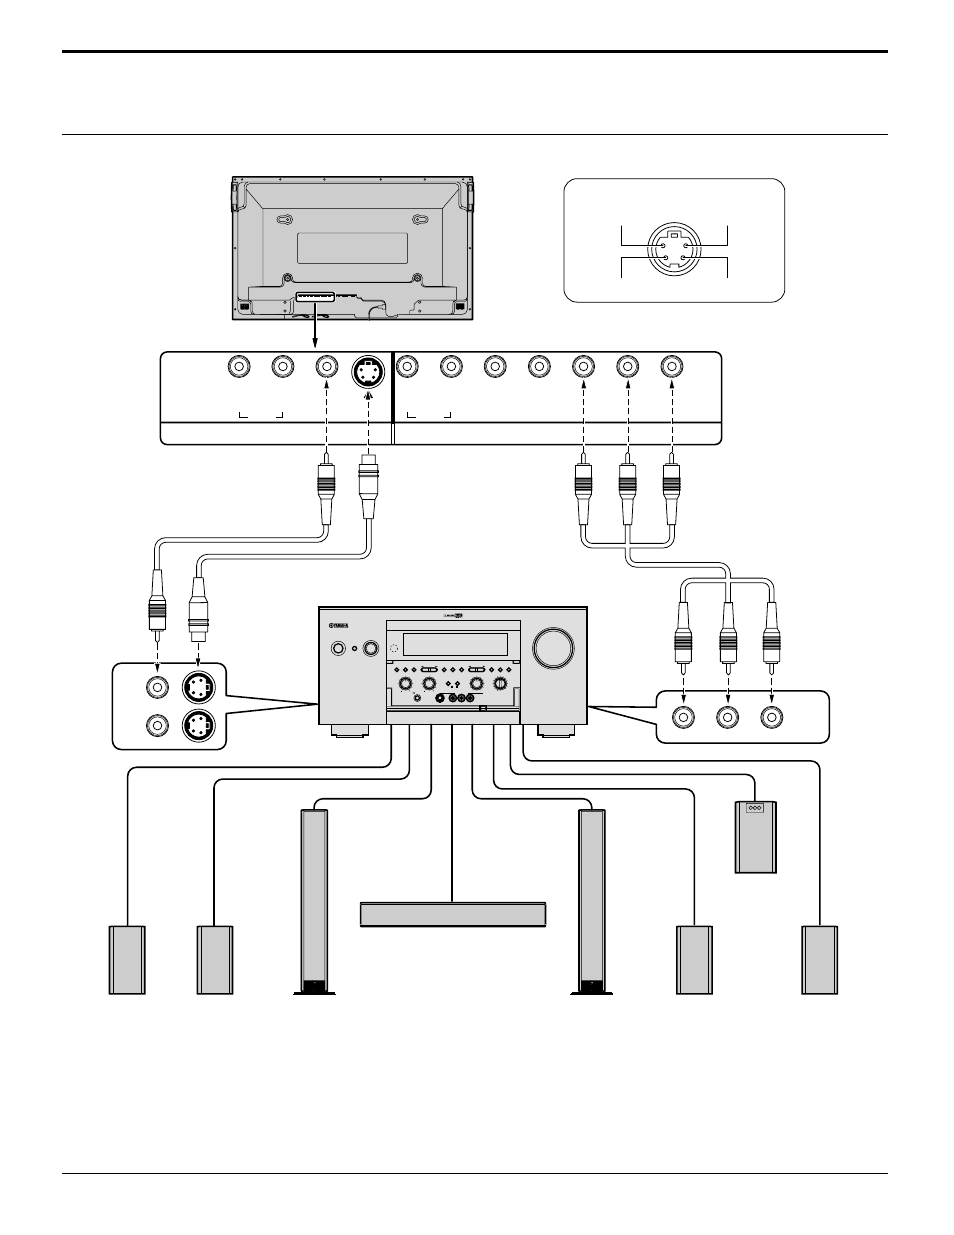 Basic connection, Connections | Yamaha PDM-1 User Manual | Page 12 / 40